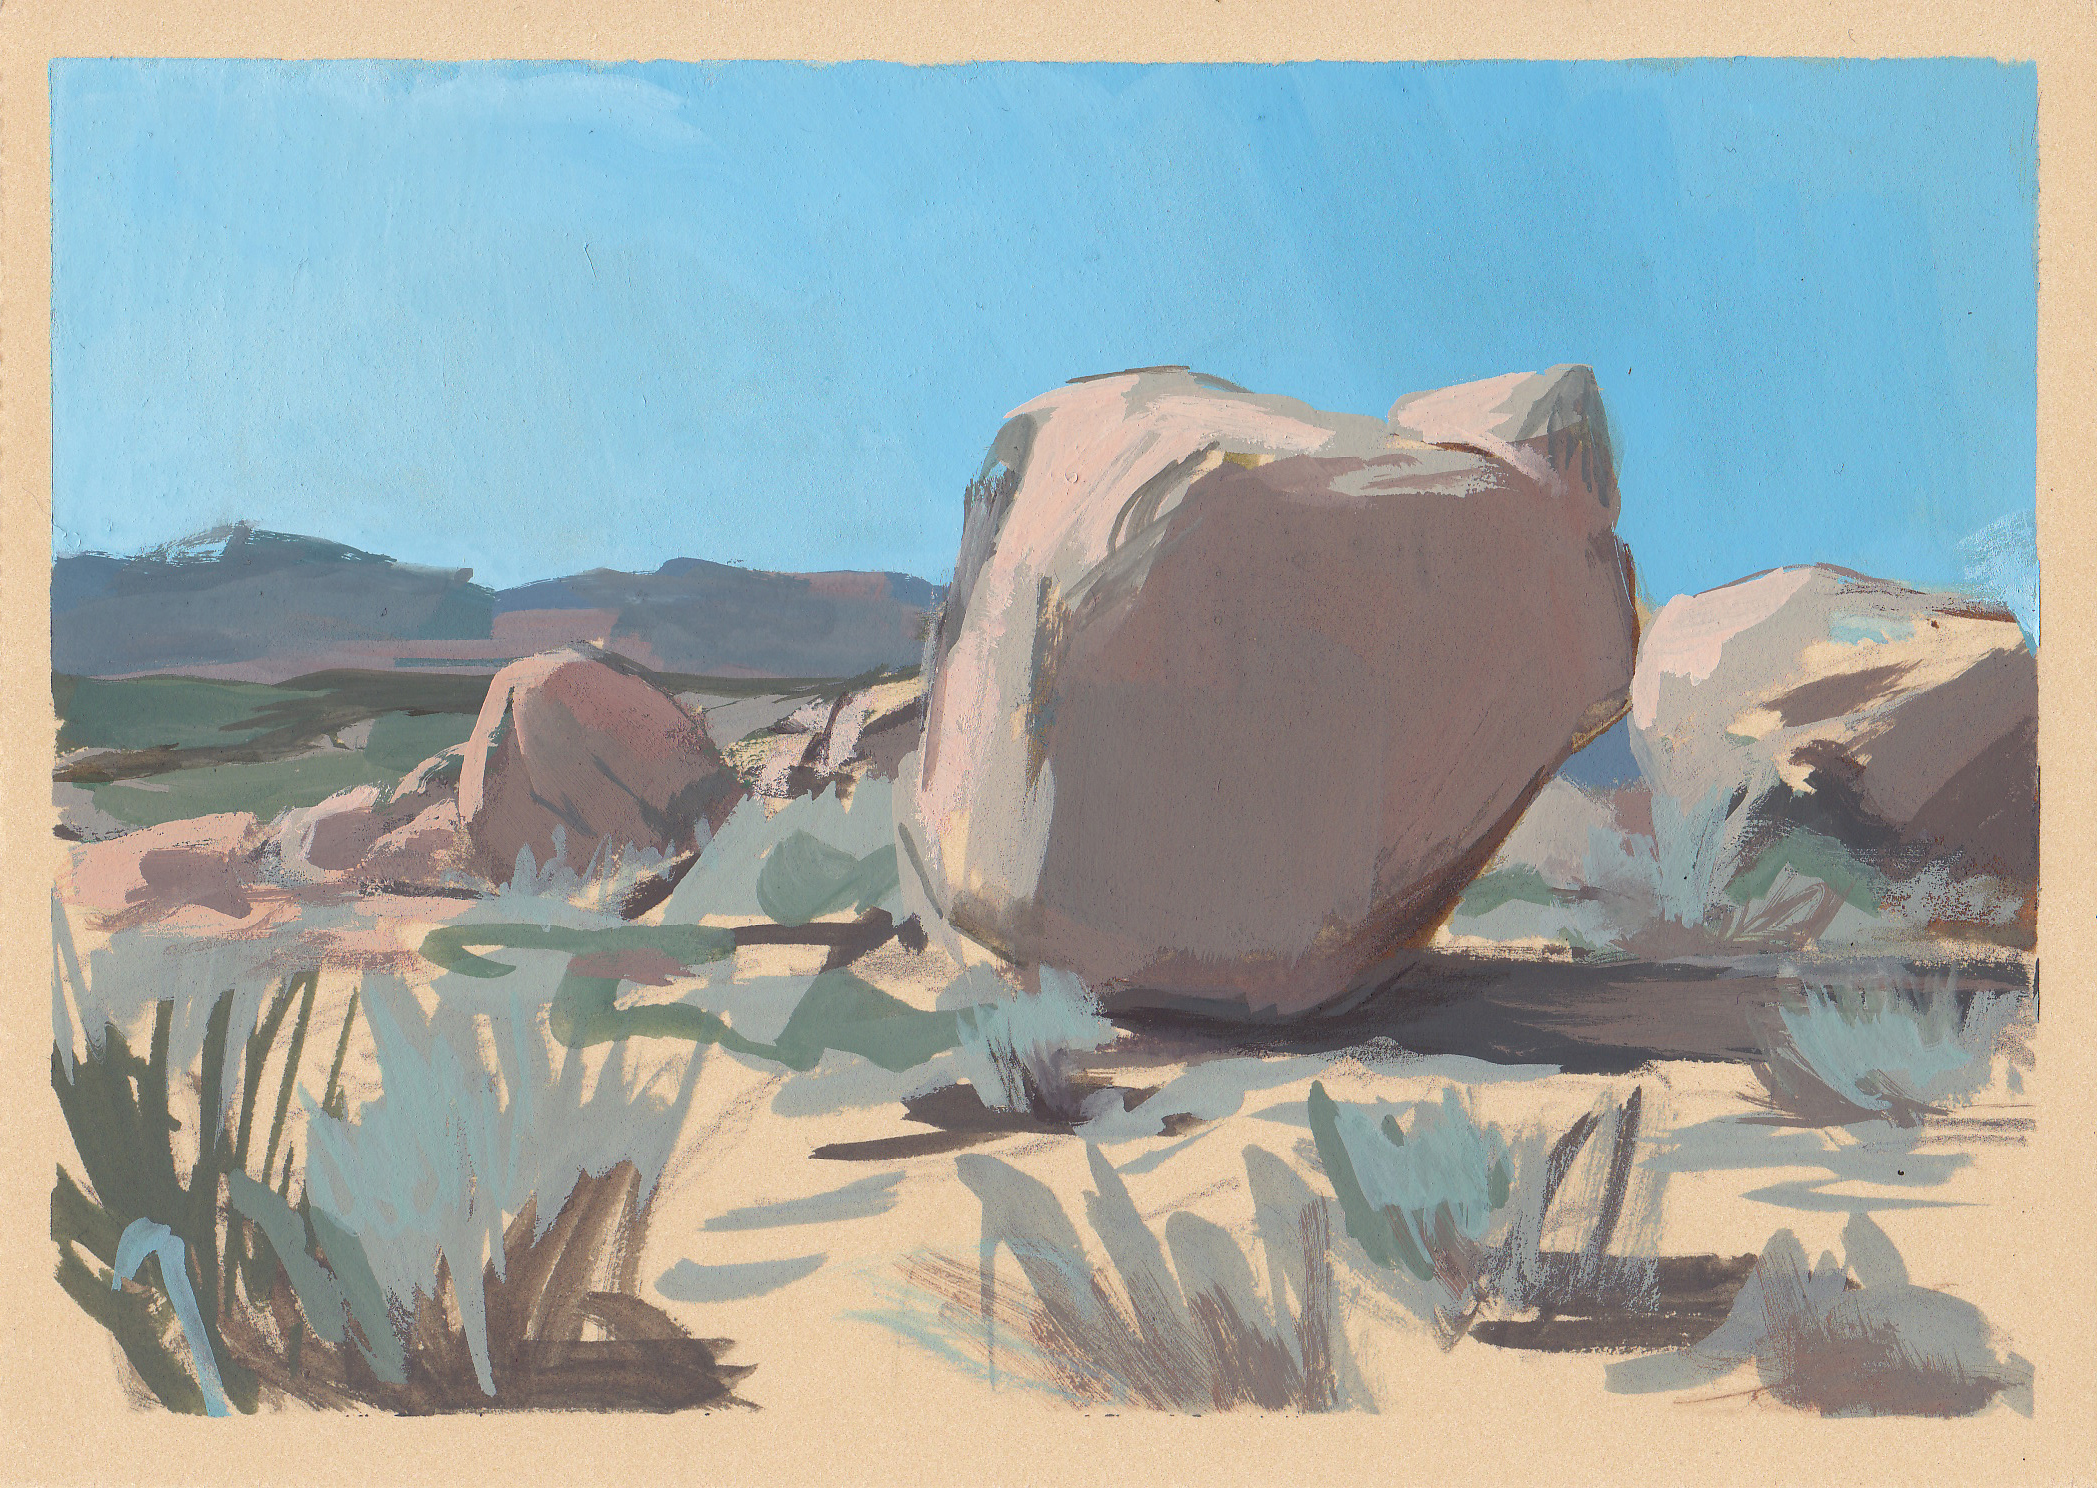    Joshua Tree     gouache on paper 5x7" 2013  private collection Denver, CO  purchase prints  